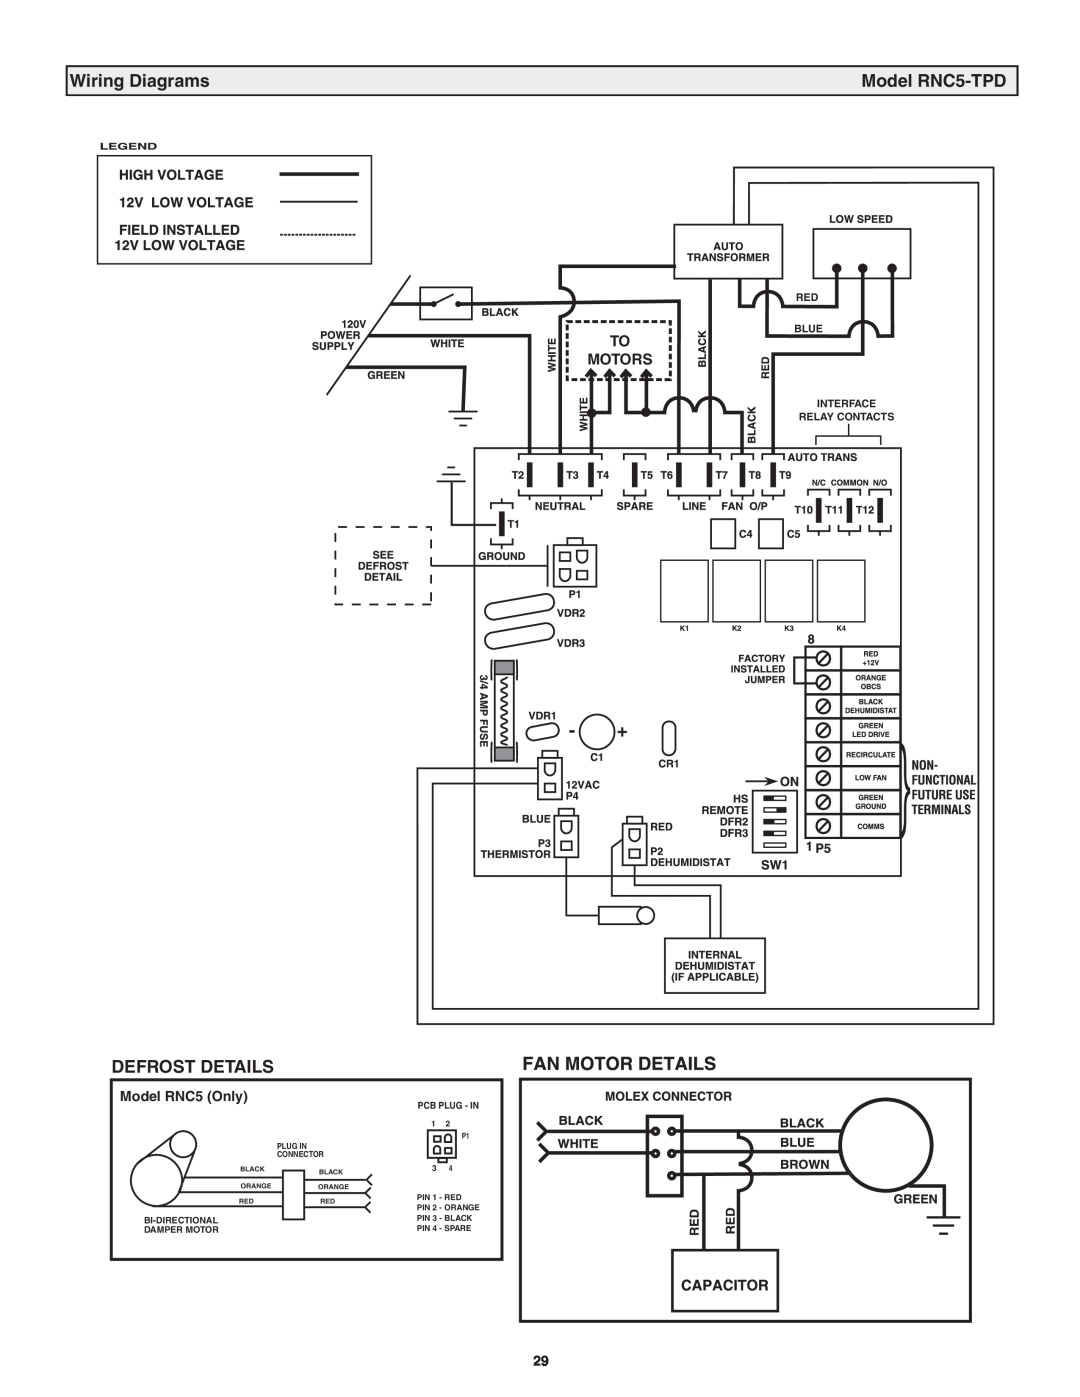 Lifebreath RNC200, RNC10, RNC120D, RNC95, RNC155 manual Wiring Diagrams, Model RNC5-TPD, Defrost Details, Plug In Connector 